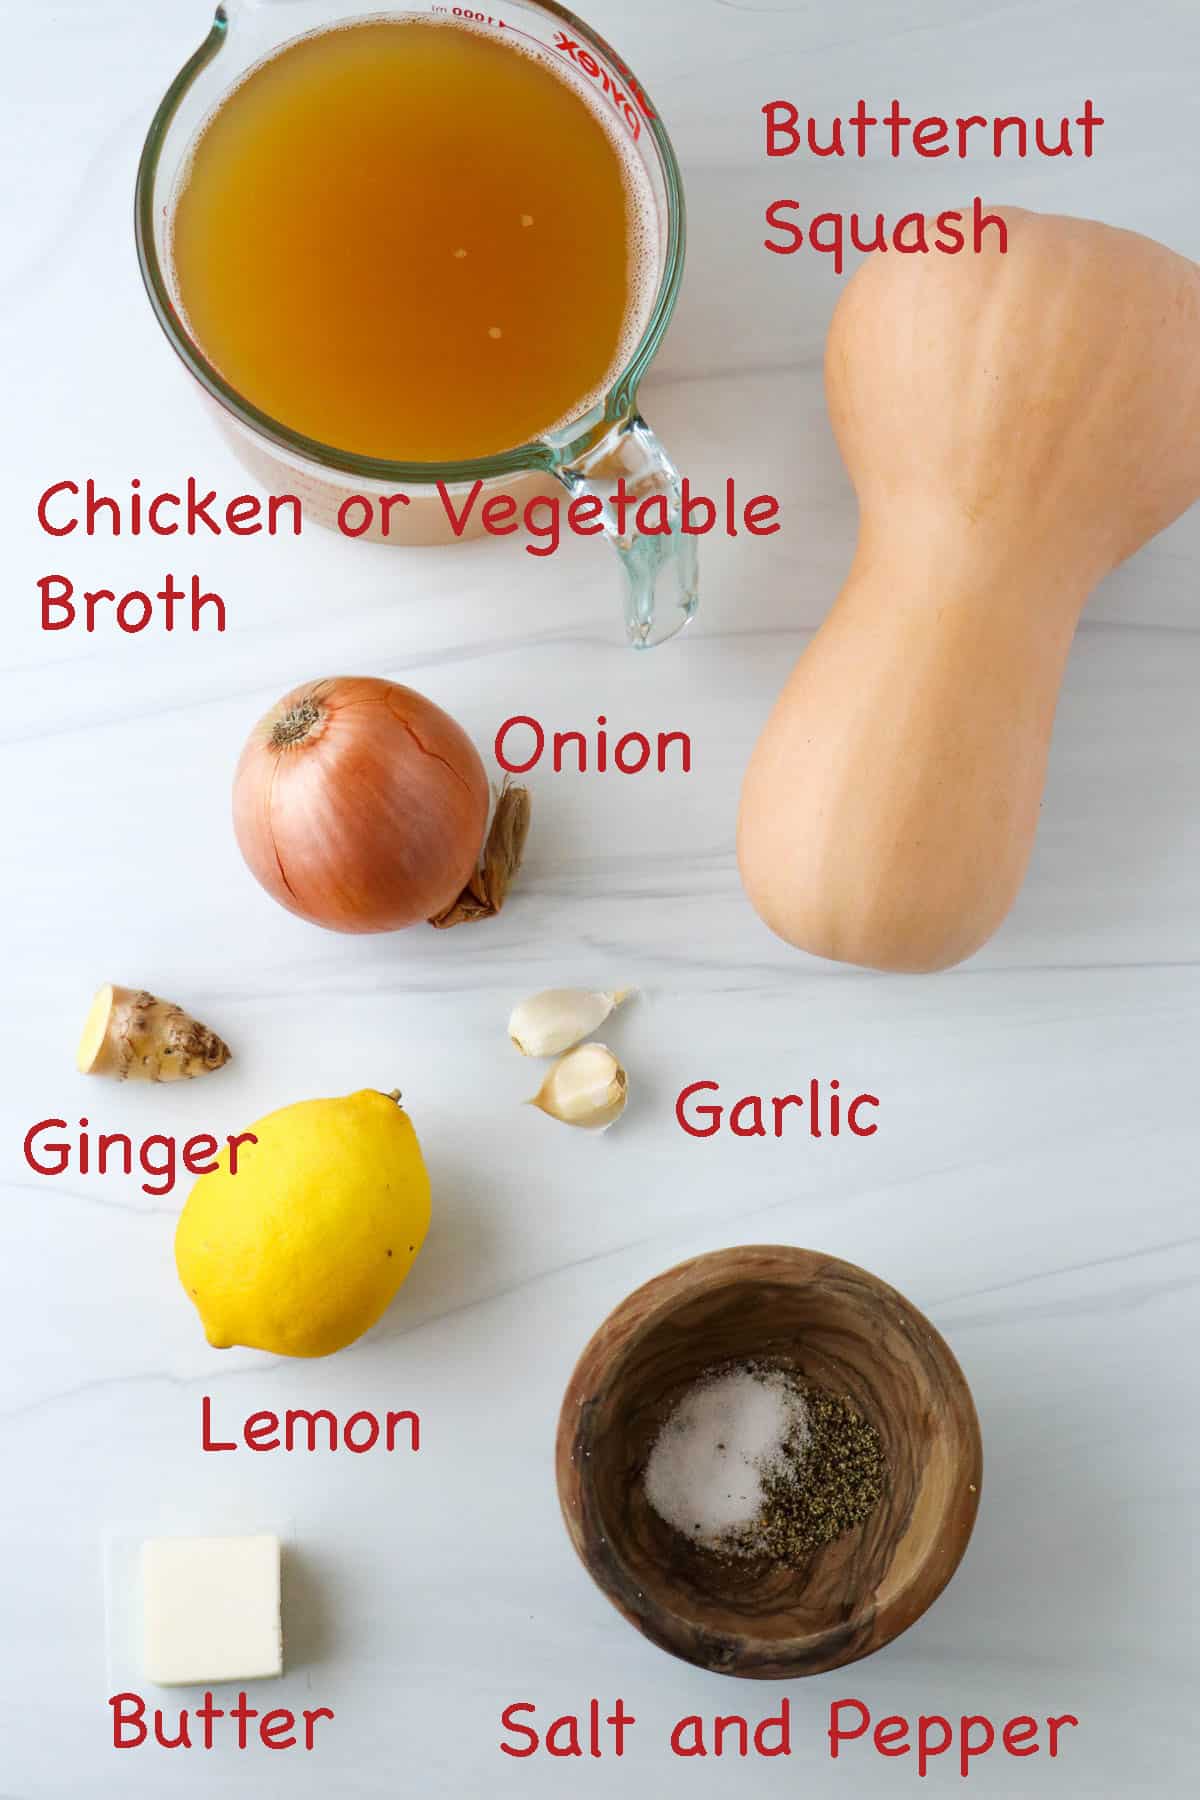 Labeled ingredients for Simple and Savory Butternut Squash Soup.